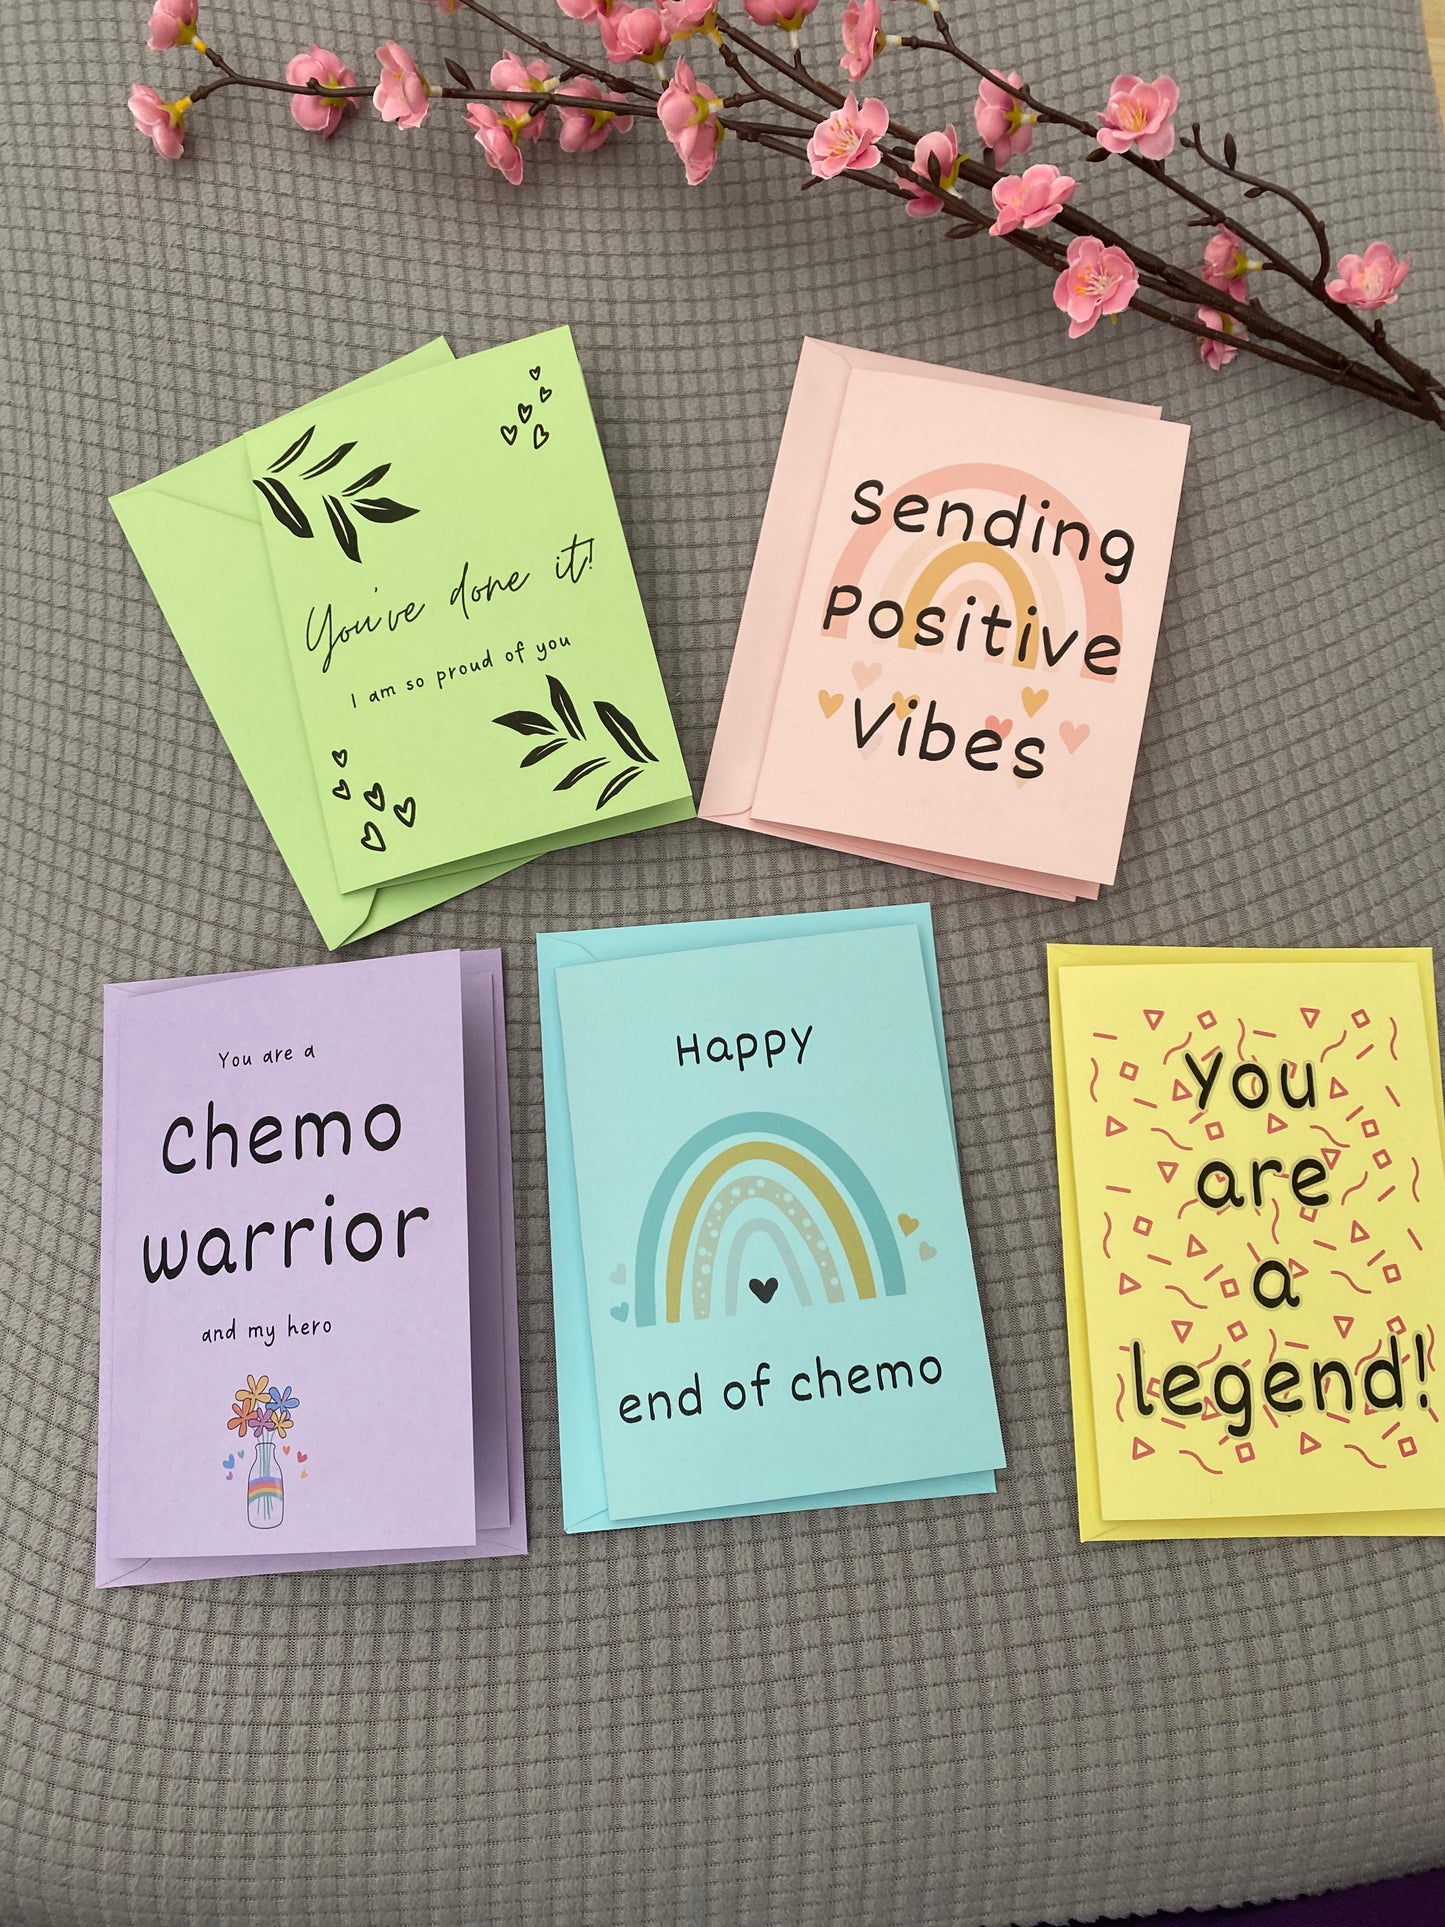 A6 colourful card - happy end of chemo